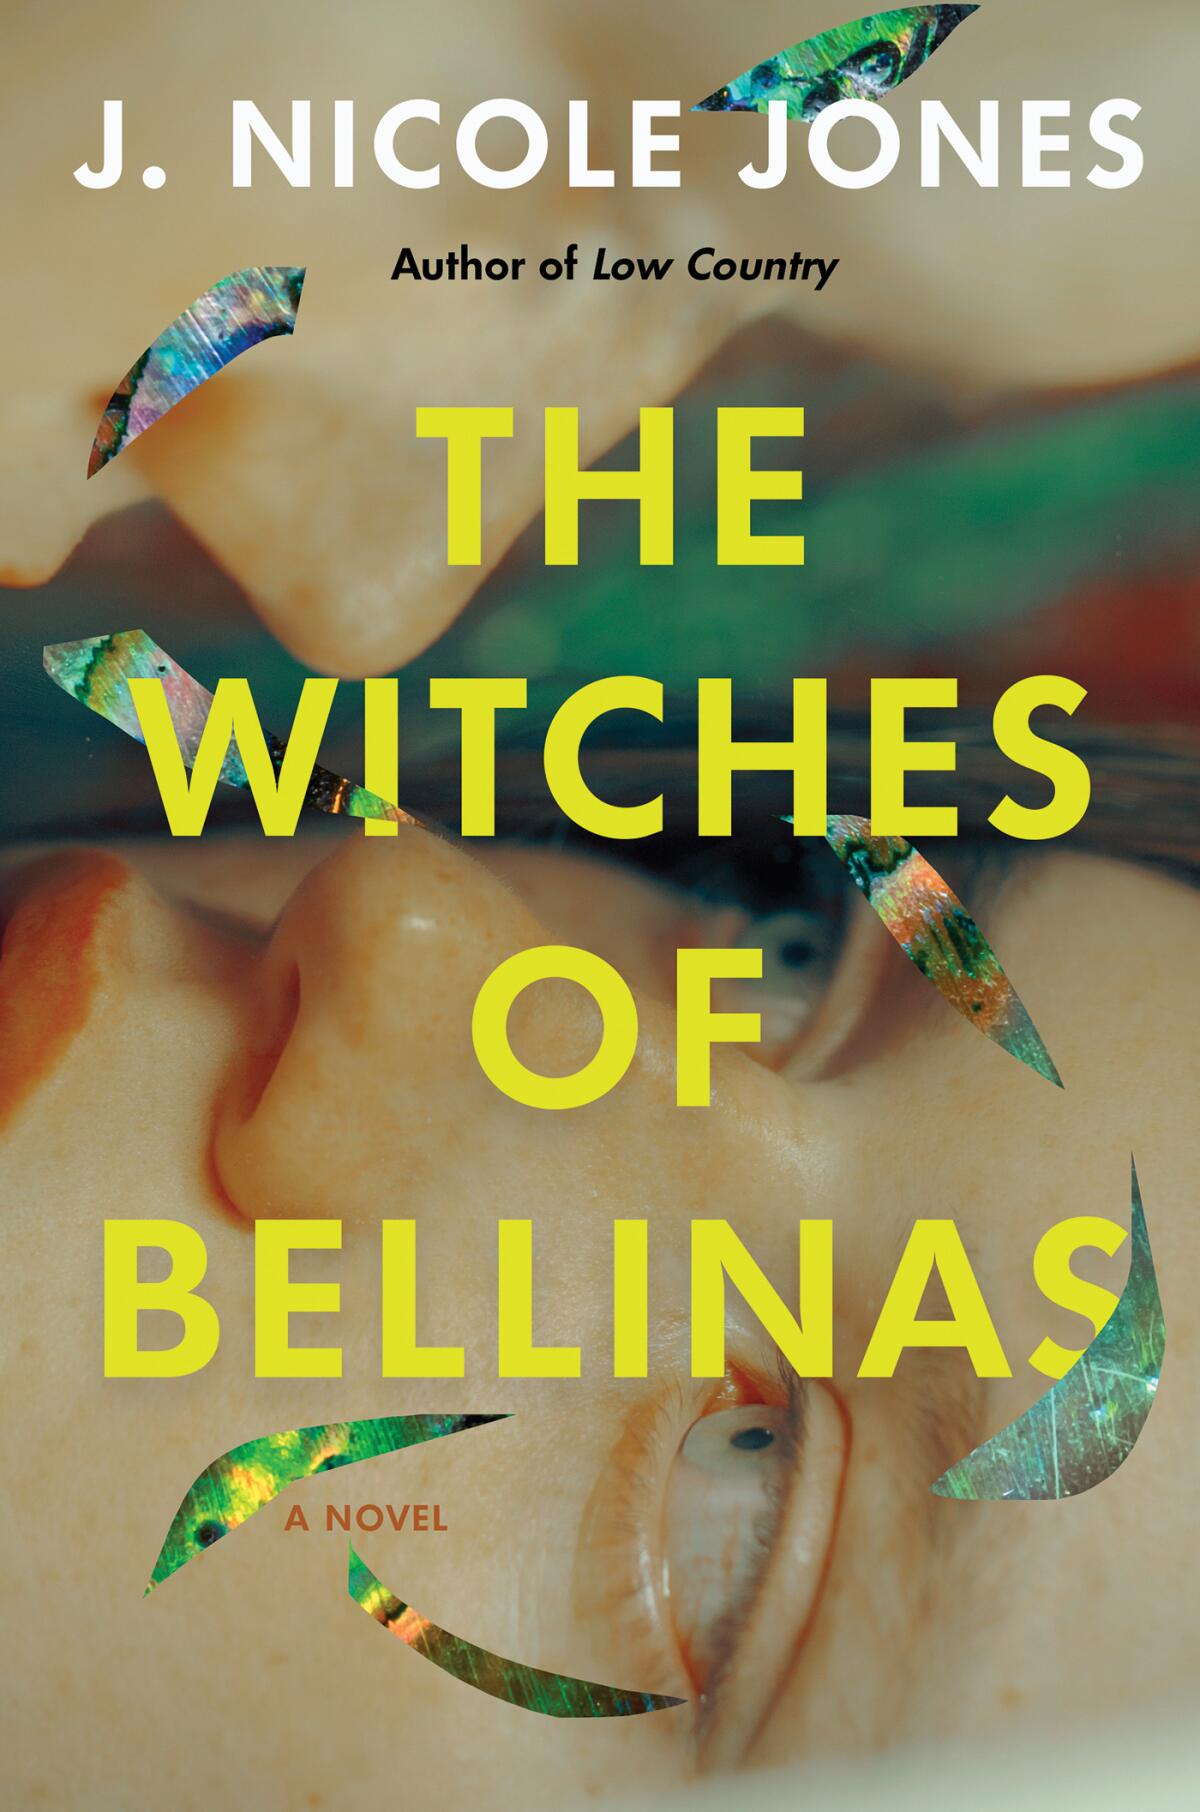 The Witches of Bellinas book cover